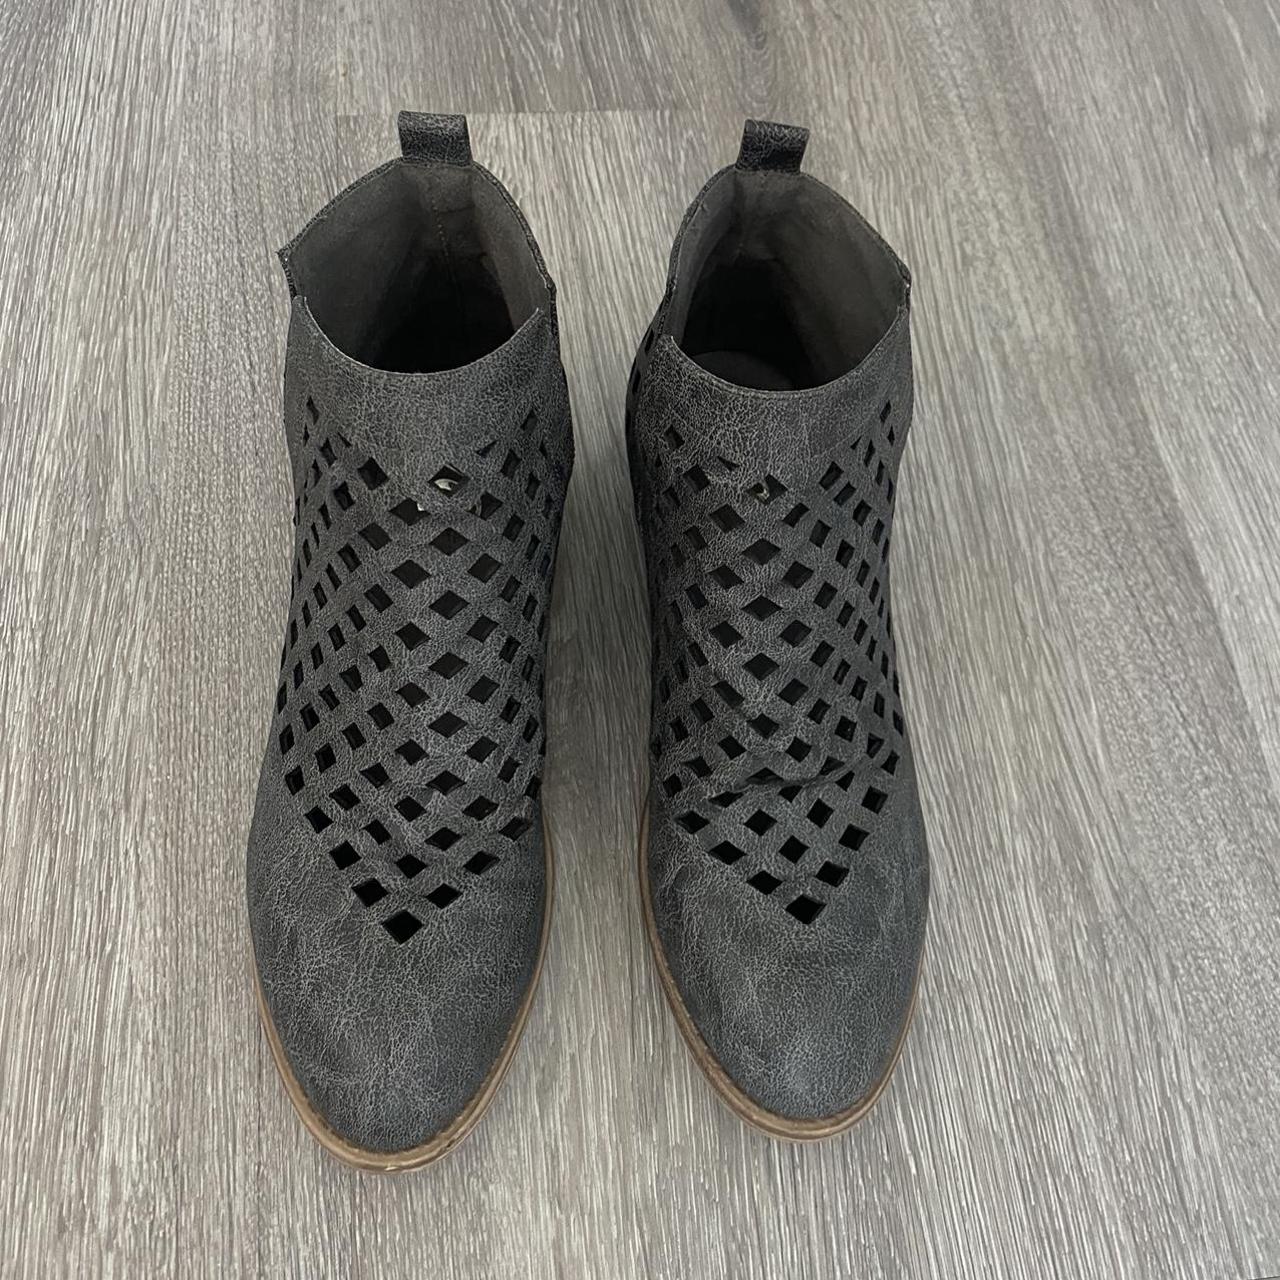 Chic Women's Grey Boots (2)